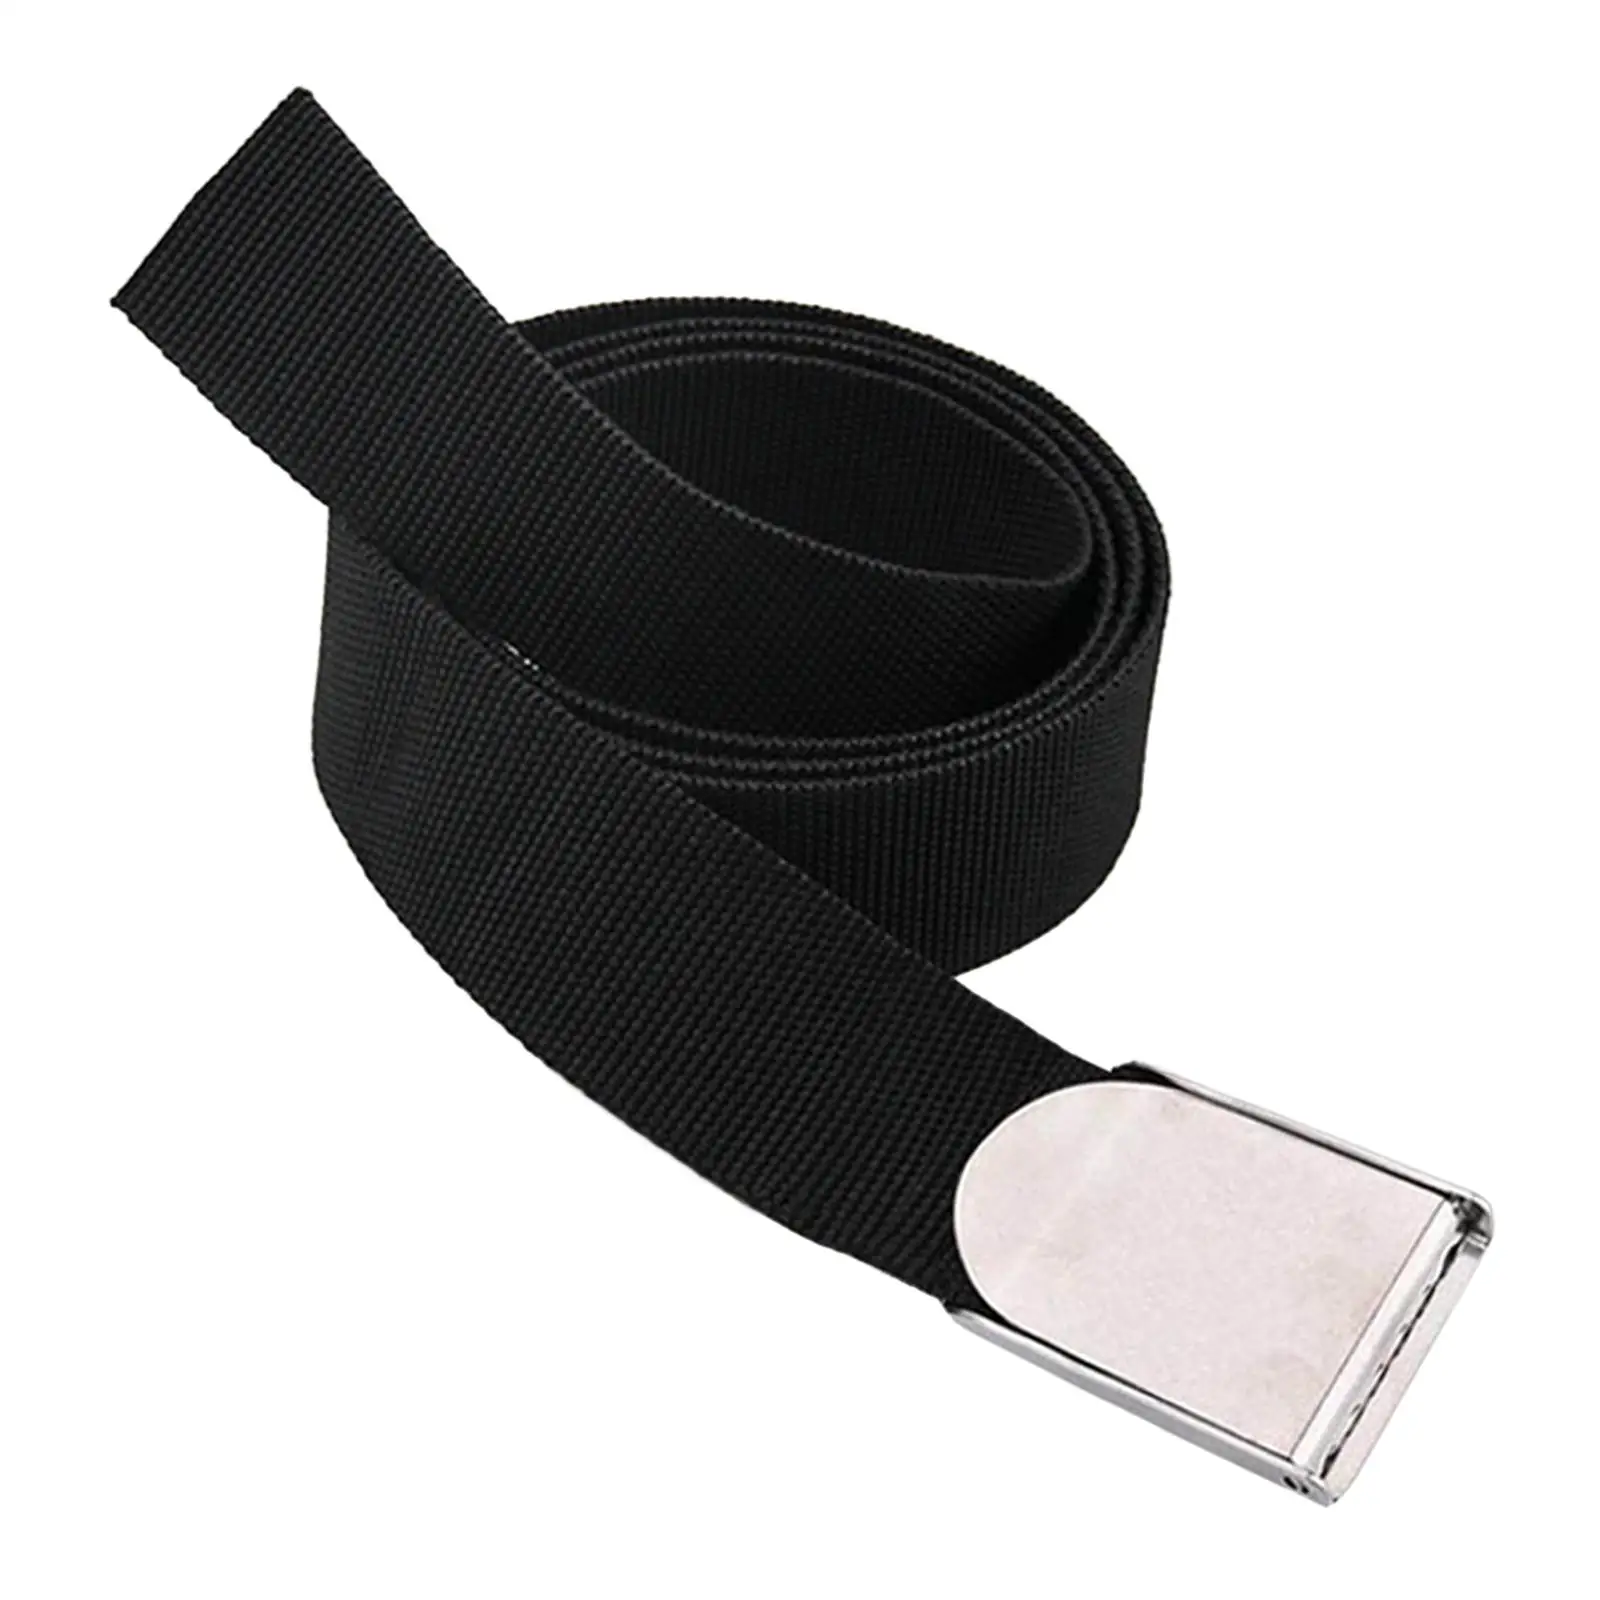 Diving Weight Waist Belt Portable Adjustable Convenient Easy to Use Nylon Scuba Weight Belt